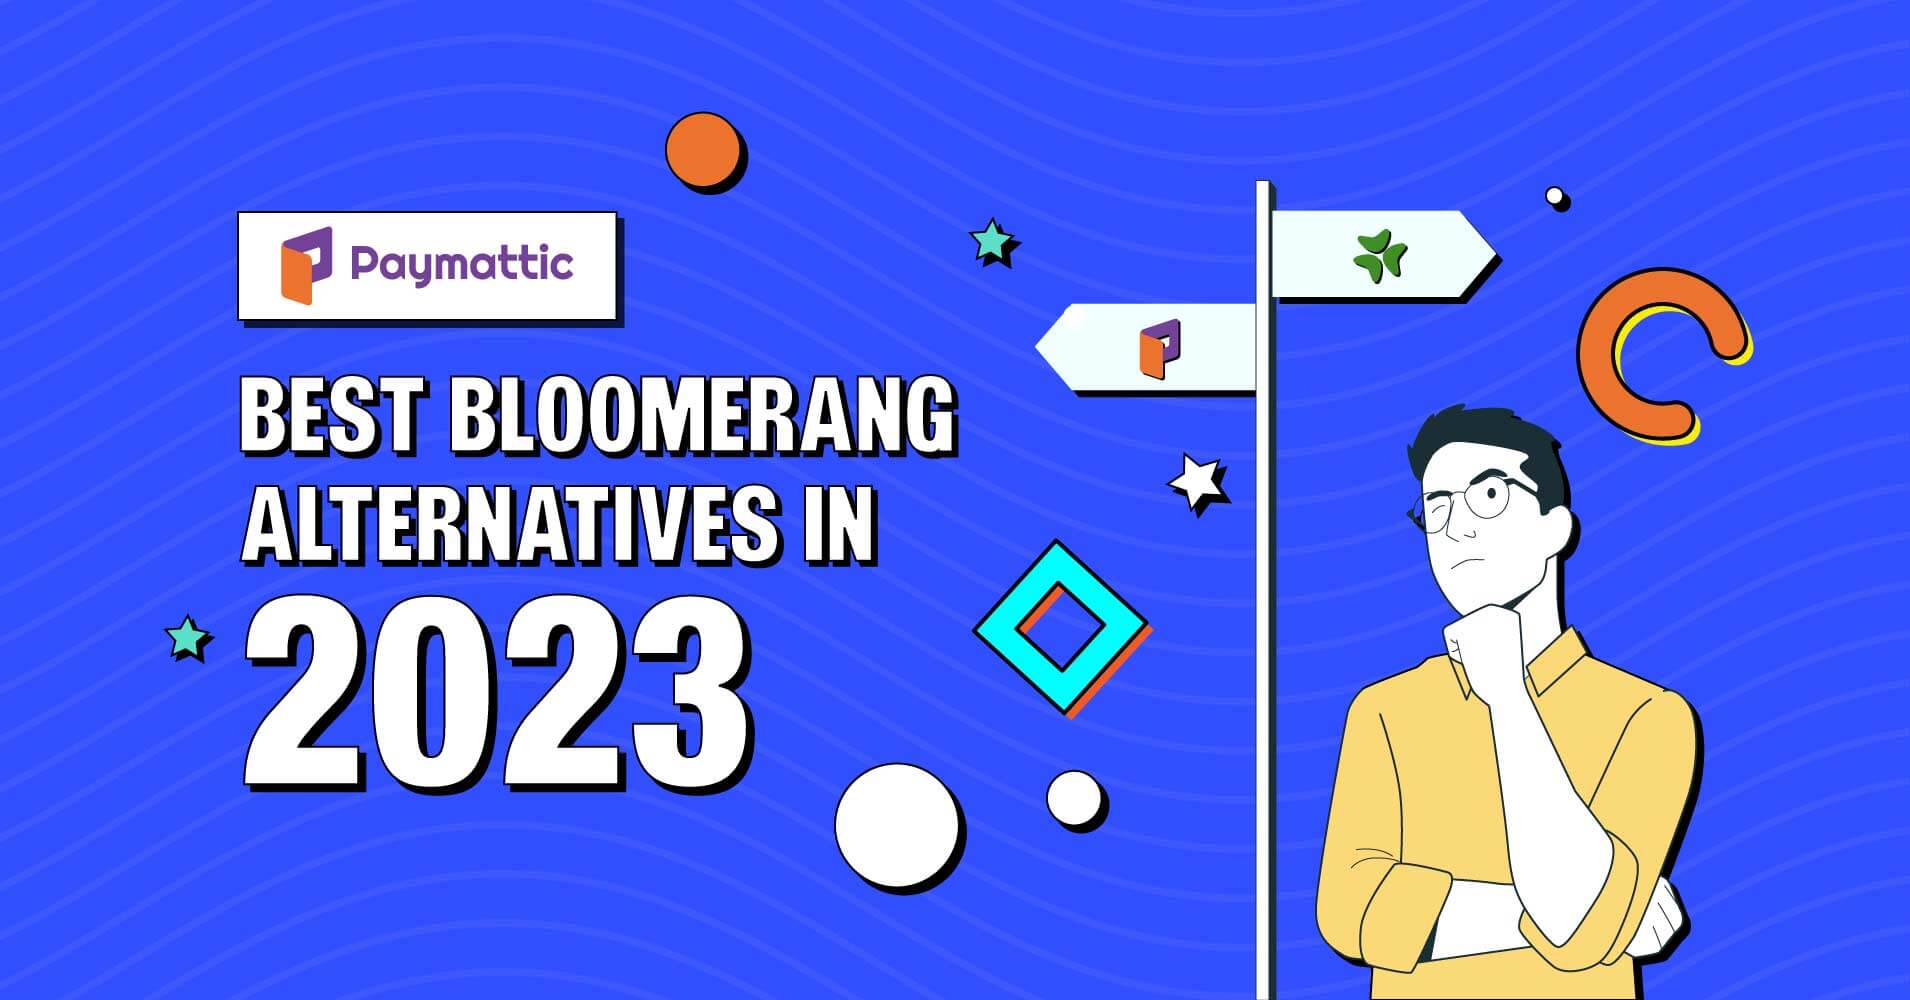 Best Bloomerang Alternatives and Competitors in 2023￼